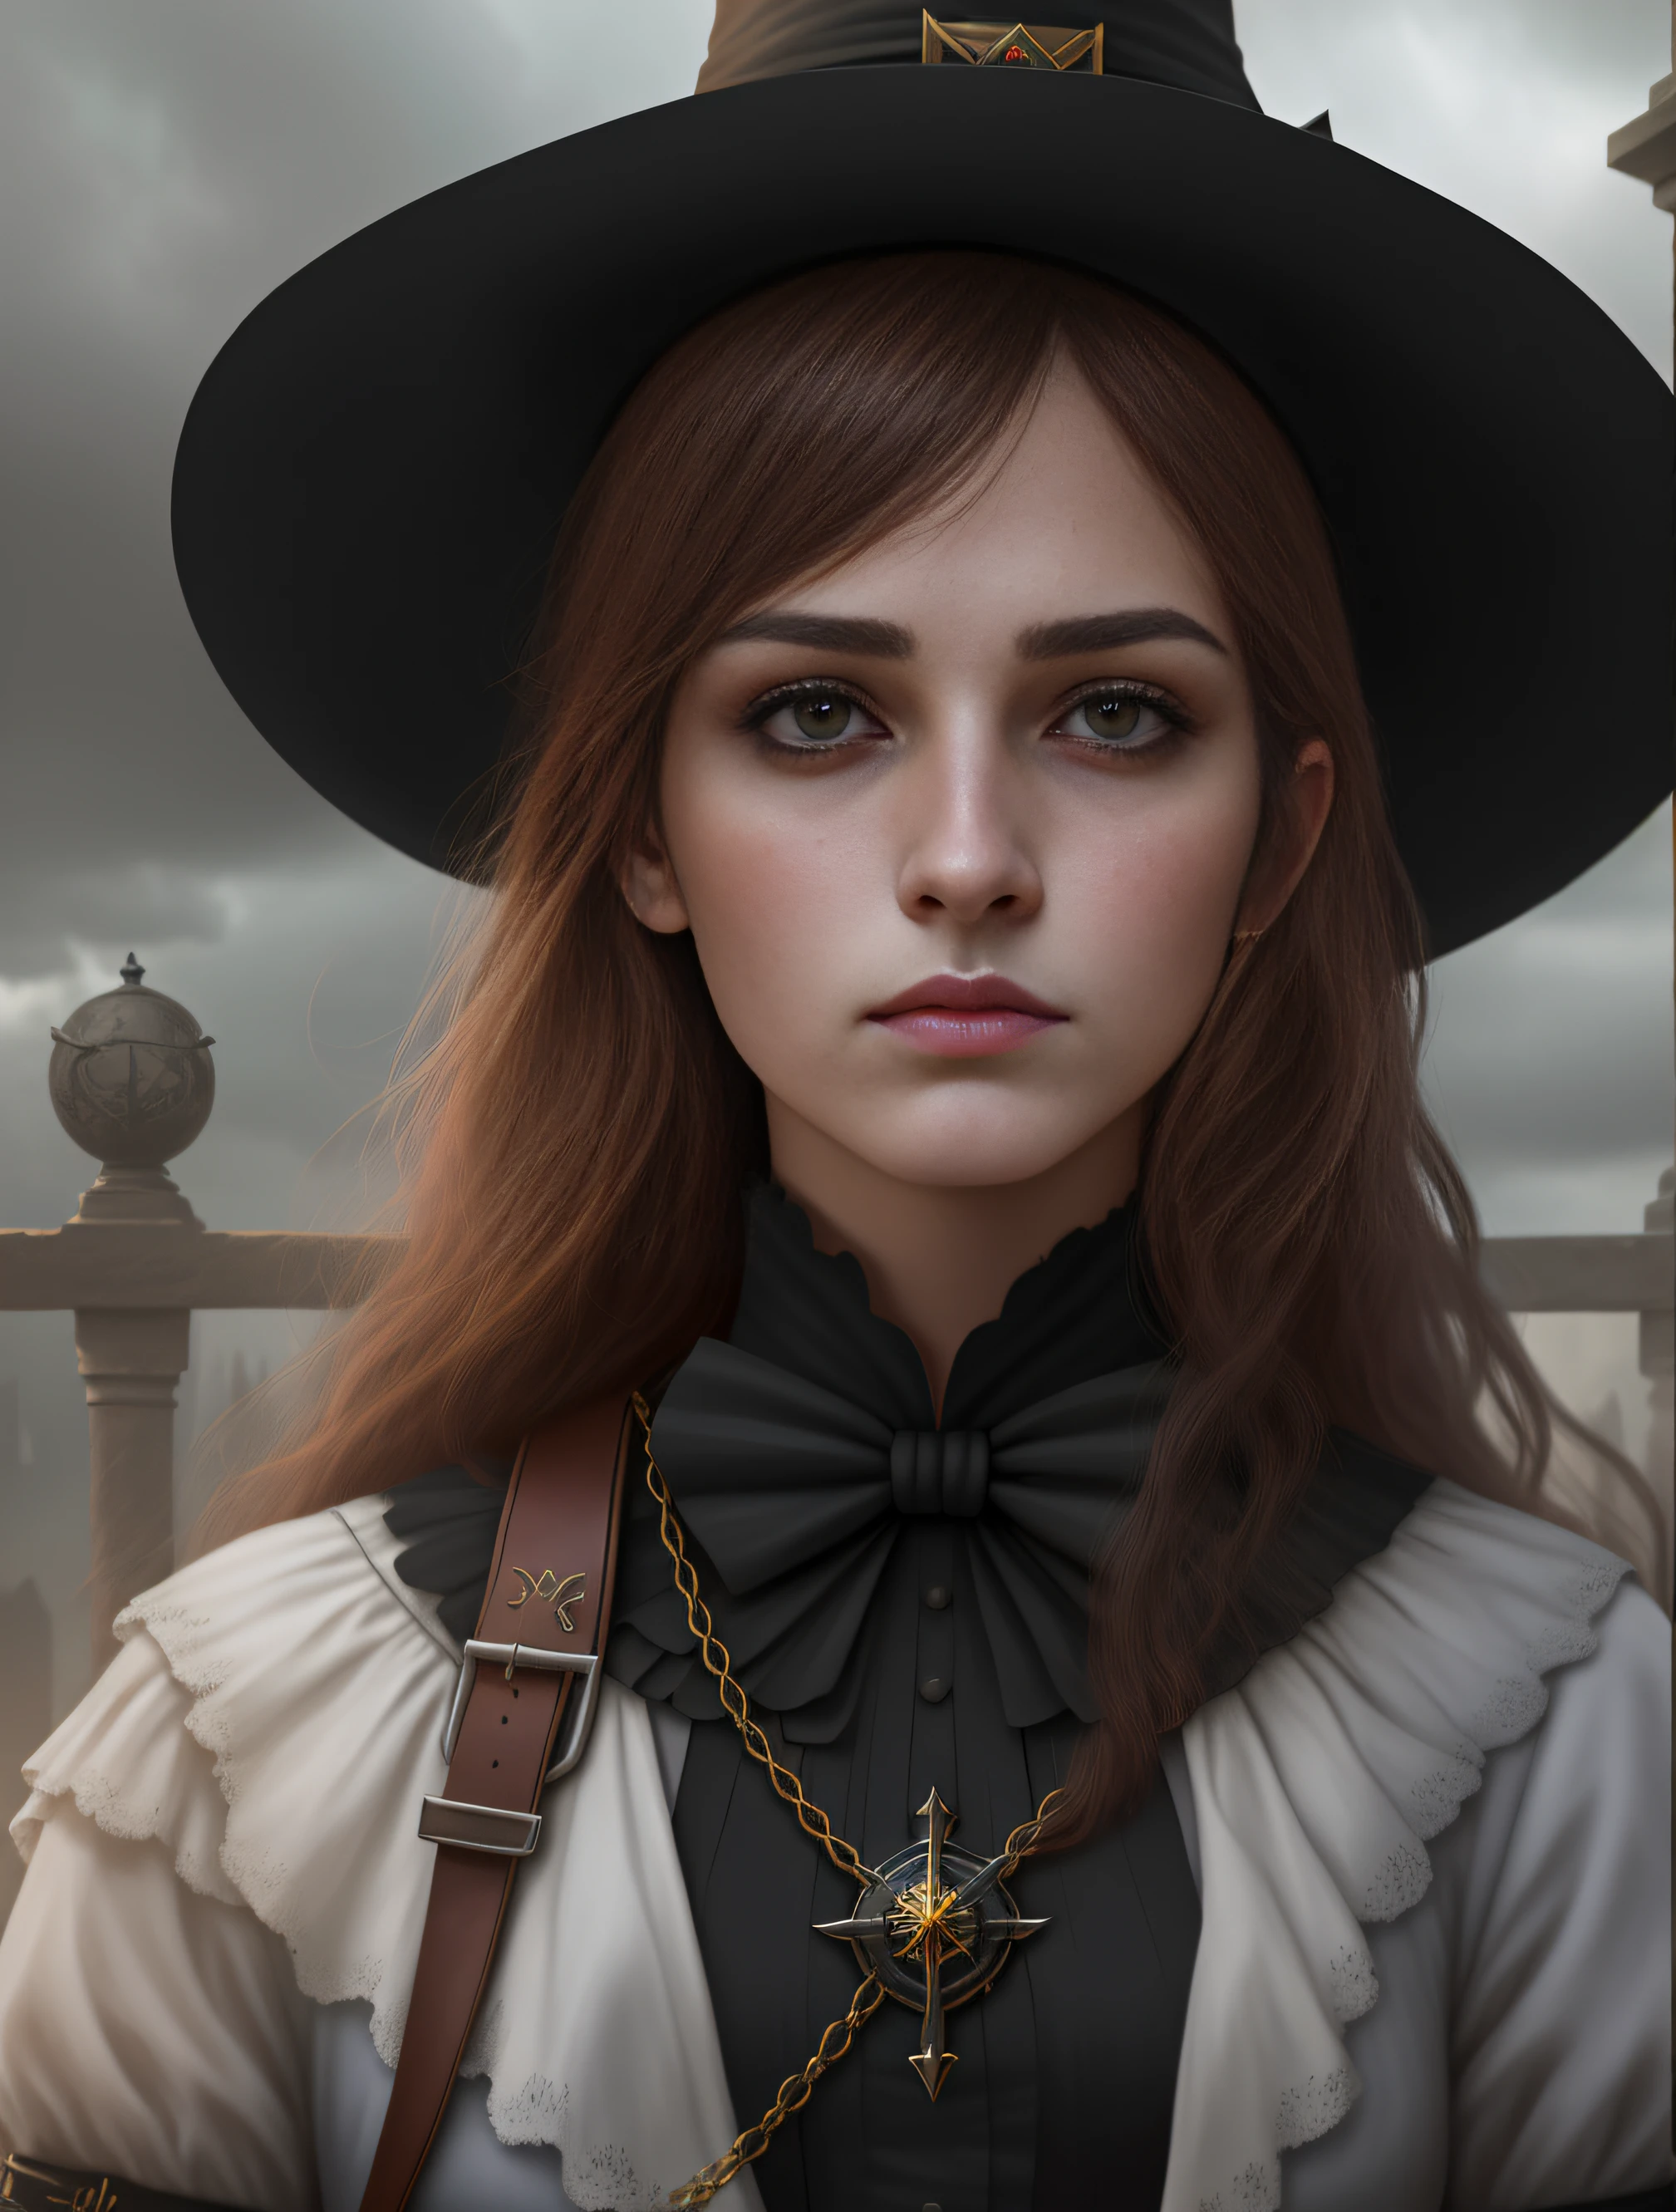 There is a woman with a hat and a cross in the background, Portrait of a young witch, Portrait of a young witch, works of art in the style of guweiz, classical witch, Photorealistic Render of Anime Girl, Karol Bak by Emma Watson Nun, Portrait of a witch, dark fantasy mixed with realism, realistic fantasy render, 8K portrait rendering